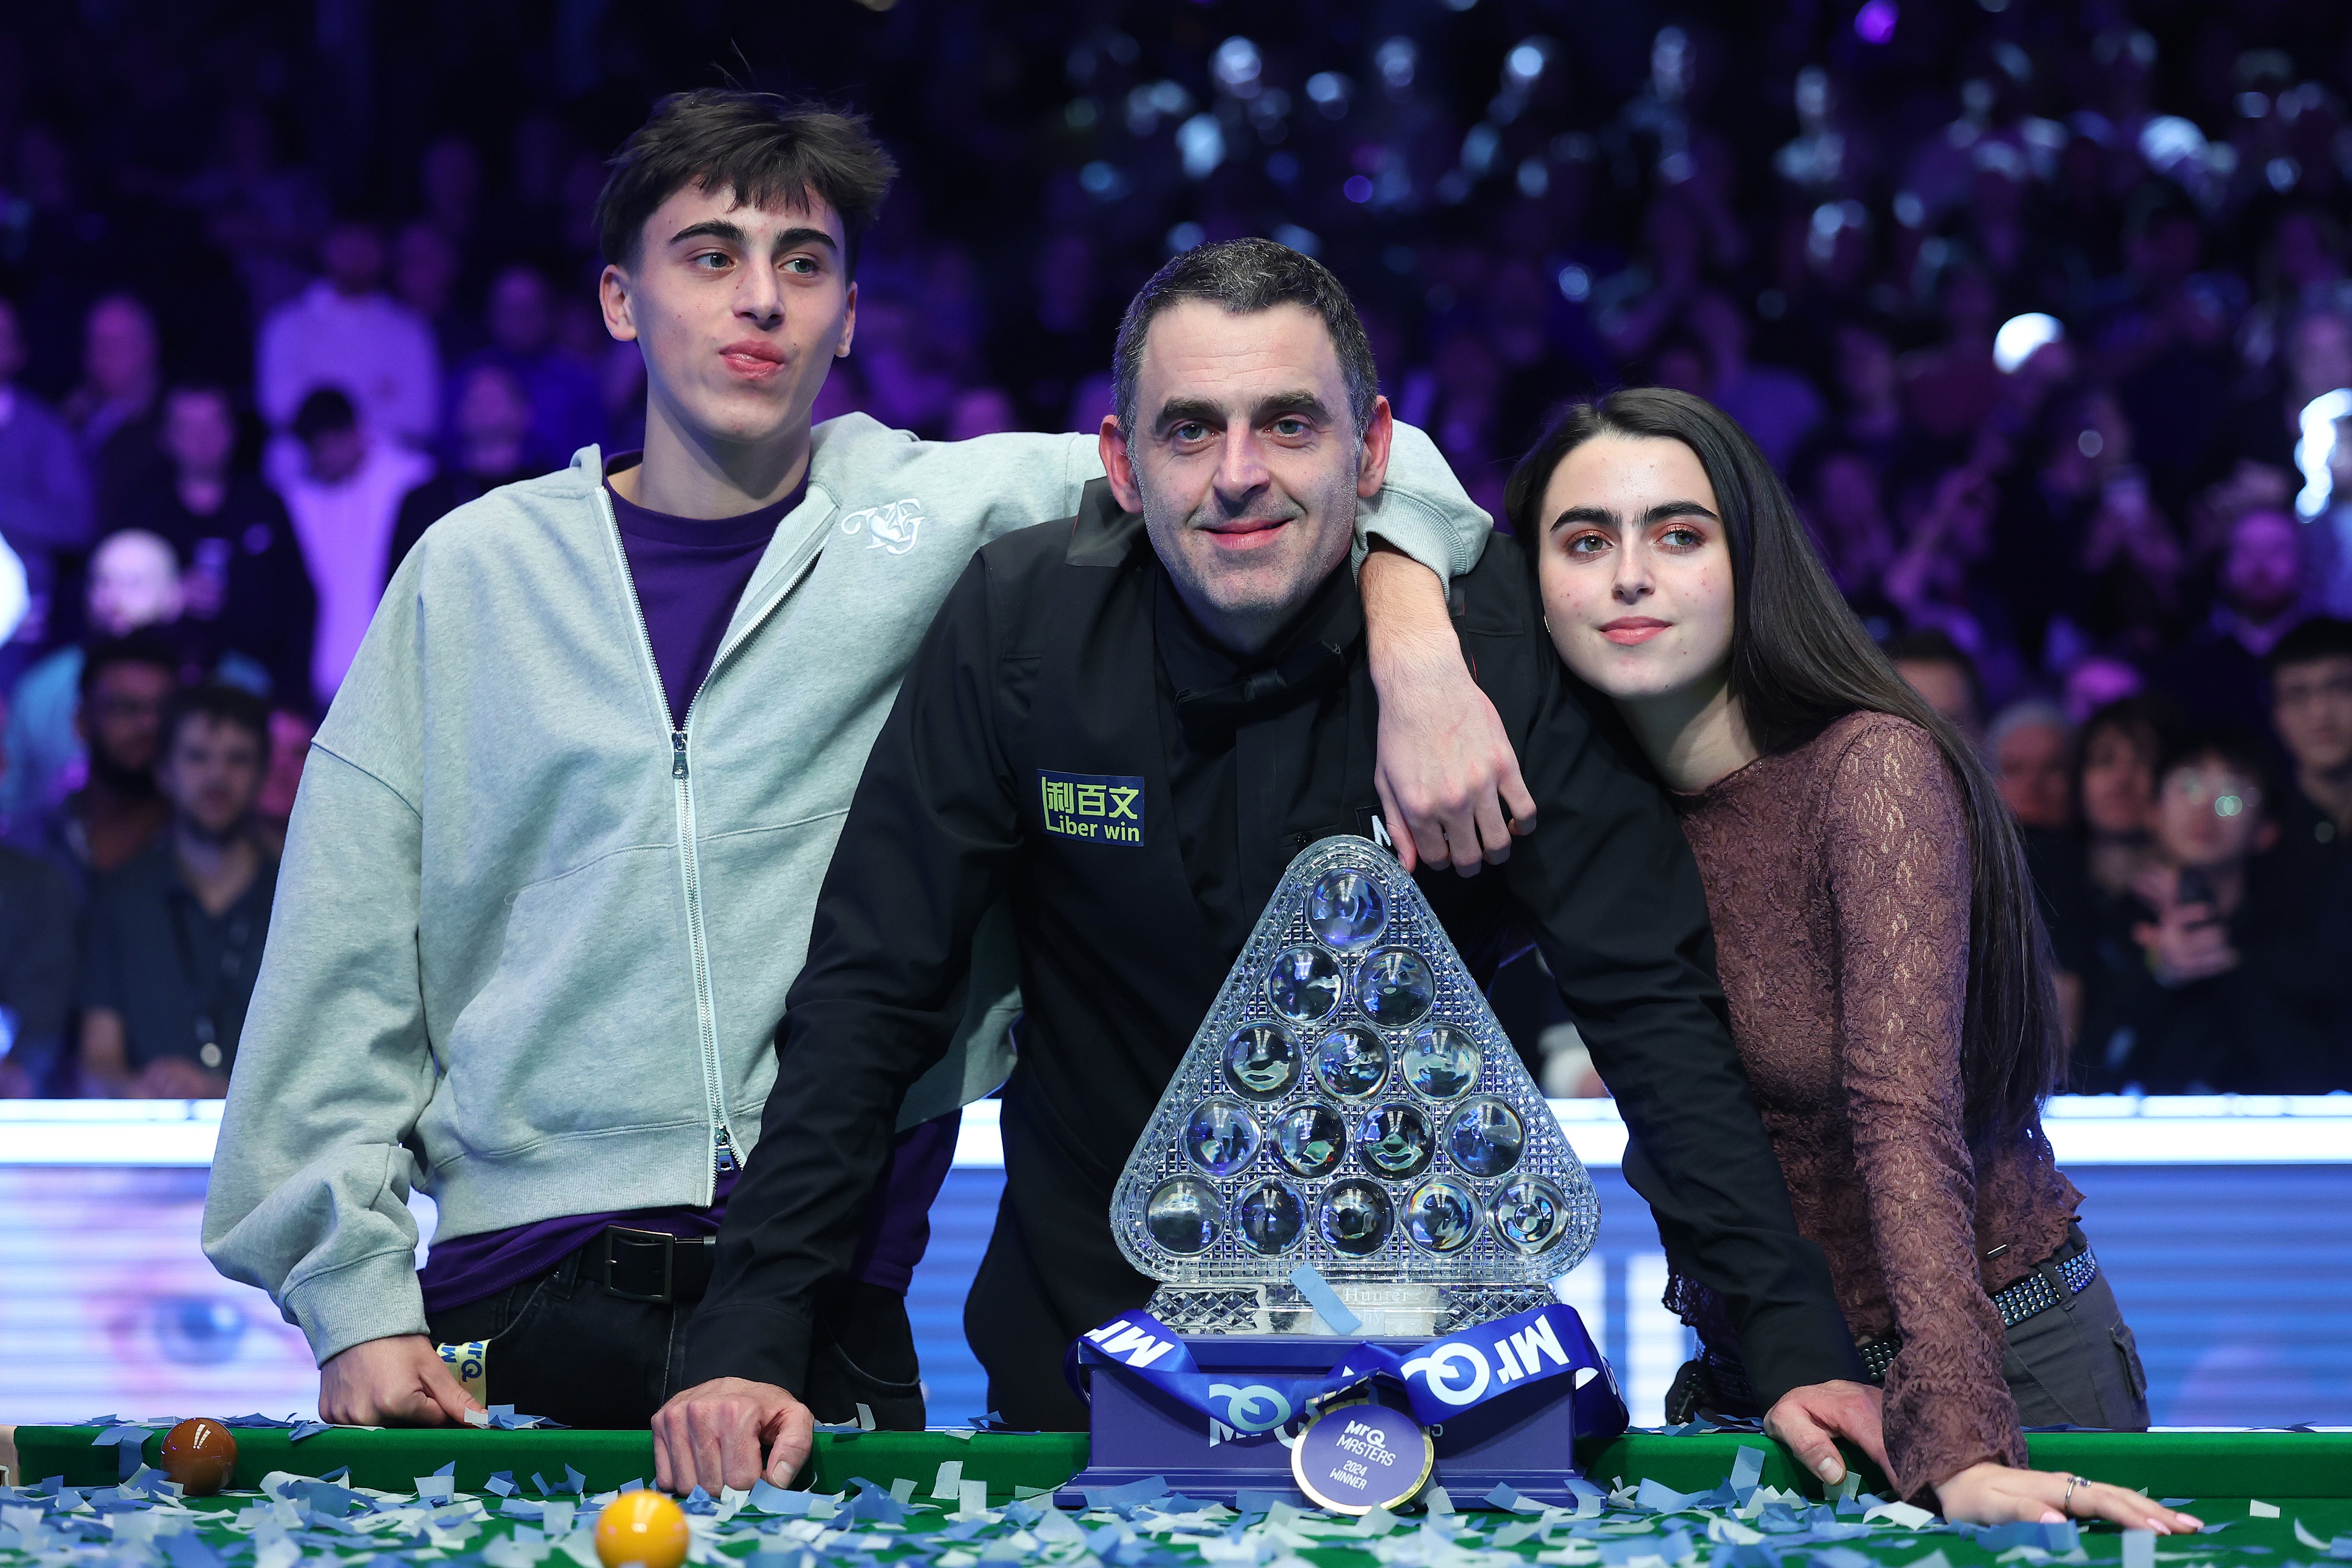 Ronnie O’Sullivan poses with his children Ronnie Jr and Lily alongside the Paul Hunter trophy